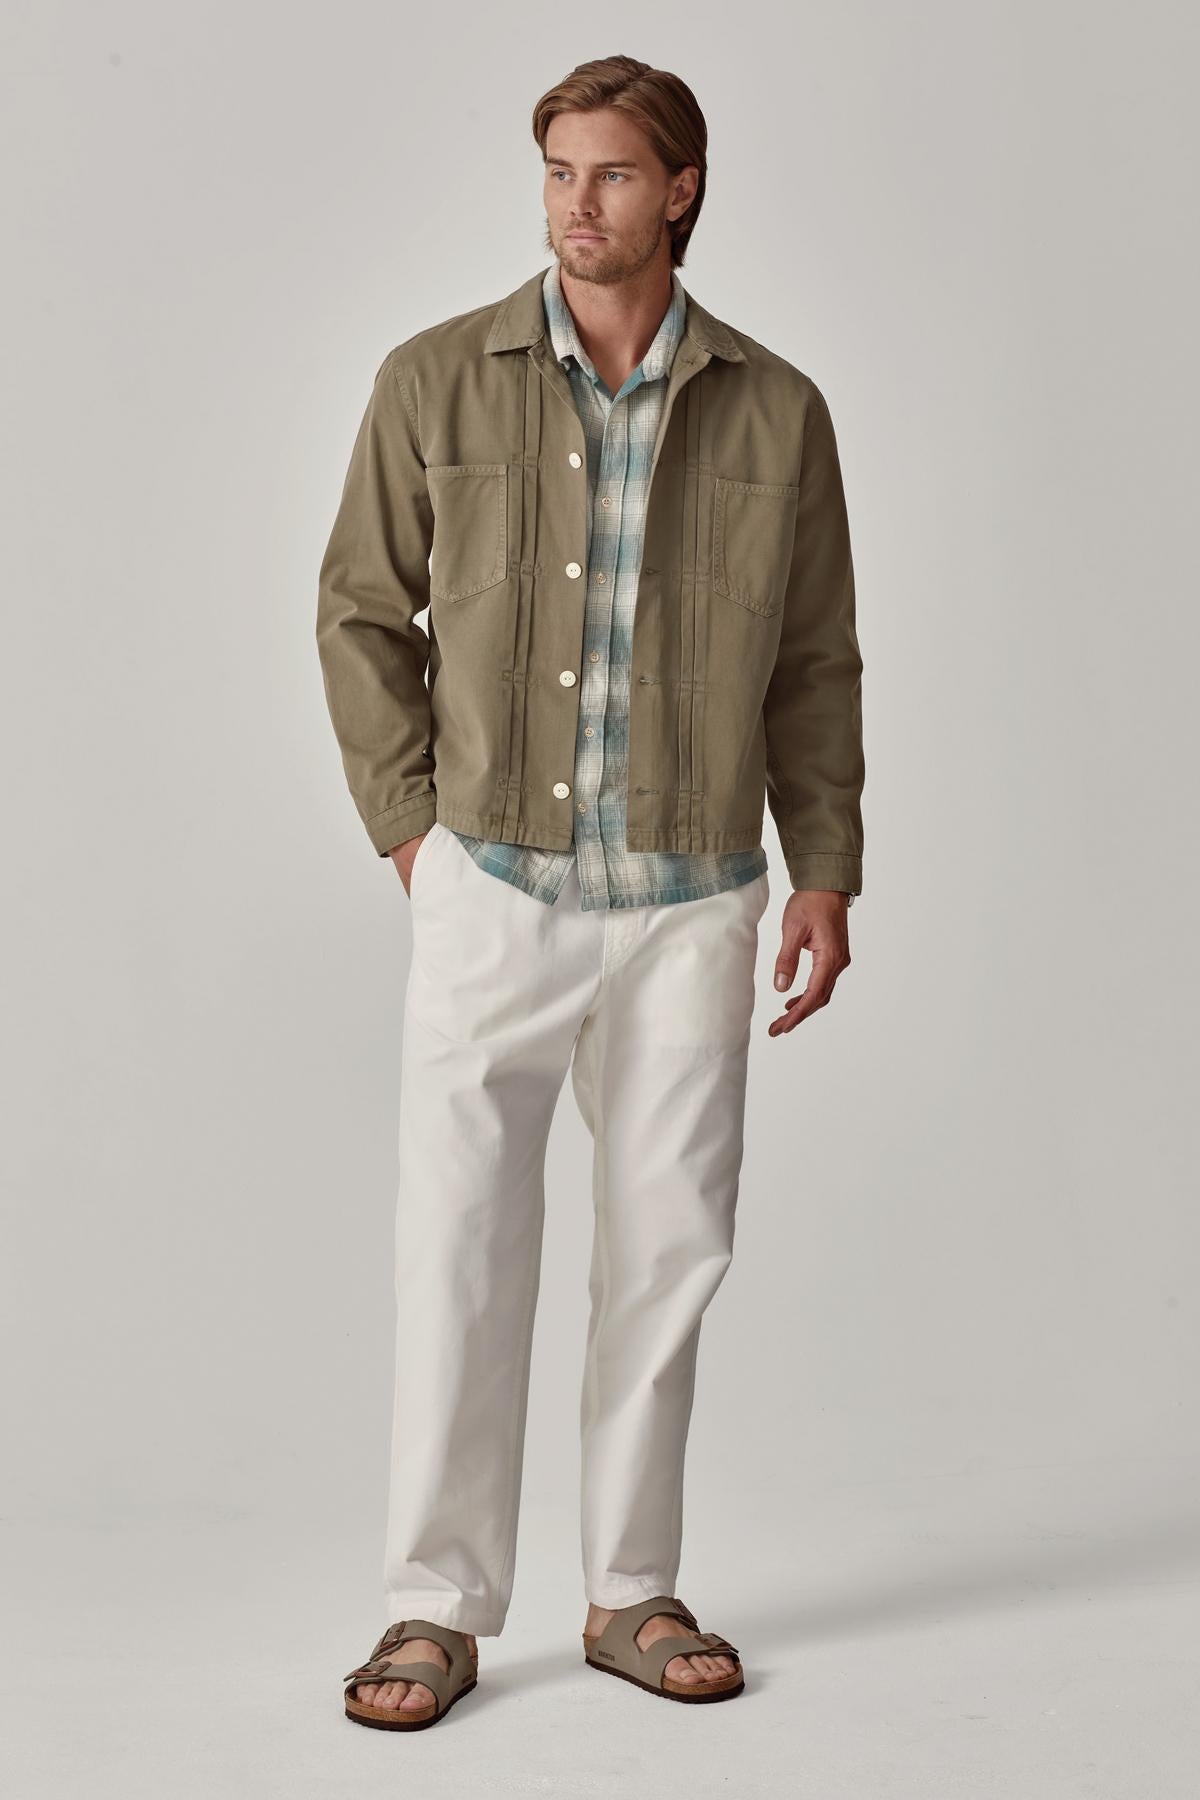   A man in a casual outfit featuring a green jacket, plaid shirt, BRANSON PANT by Velvet by Graham & Spencer with an elastic drawstring waist, and brown sandals. 